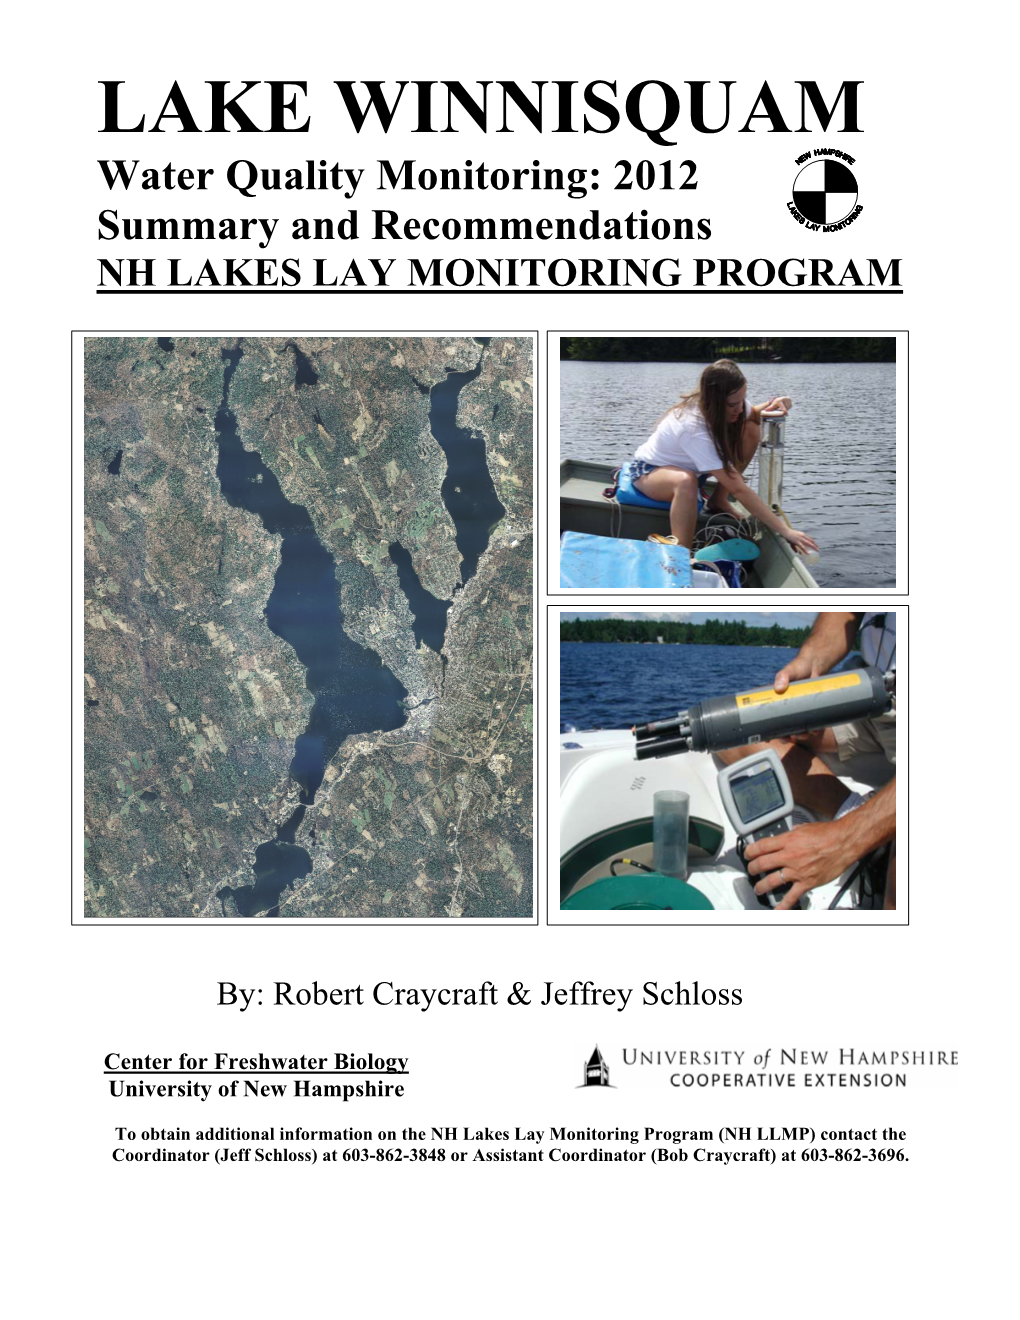 LAKE WINNISQUAM Water Quality Monitoring: 2012 Summary and Recommendations NH LAKES LAY MONITORING PROGRAM